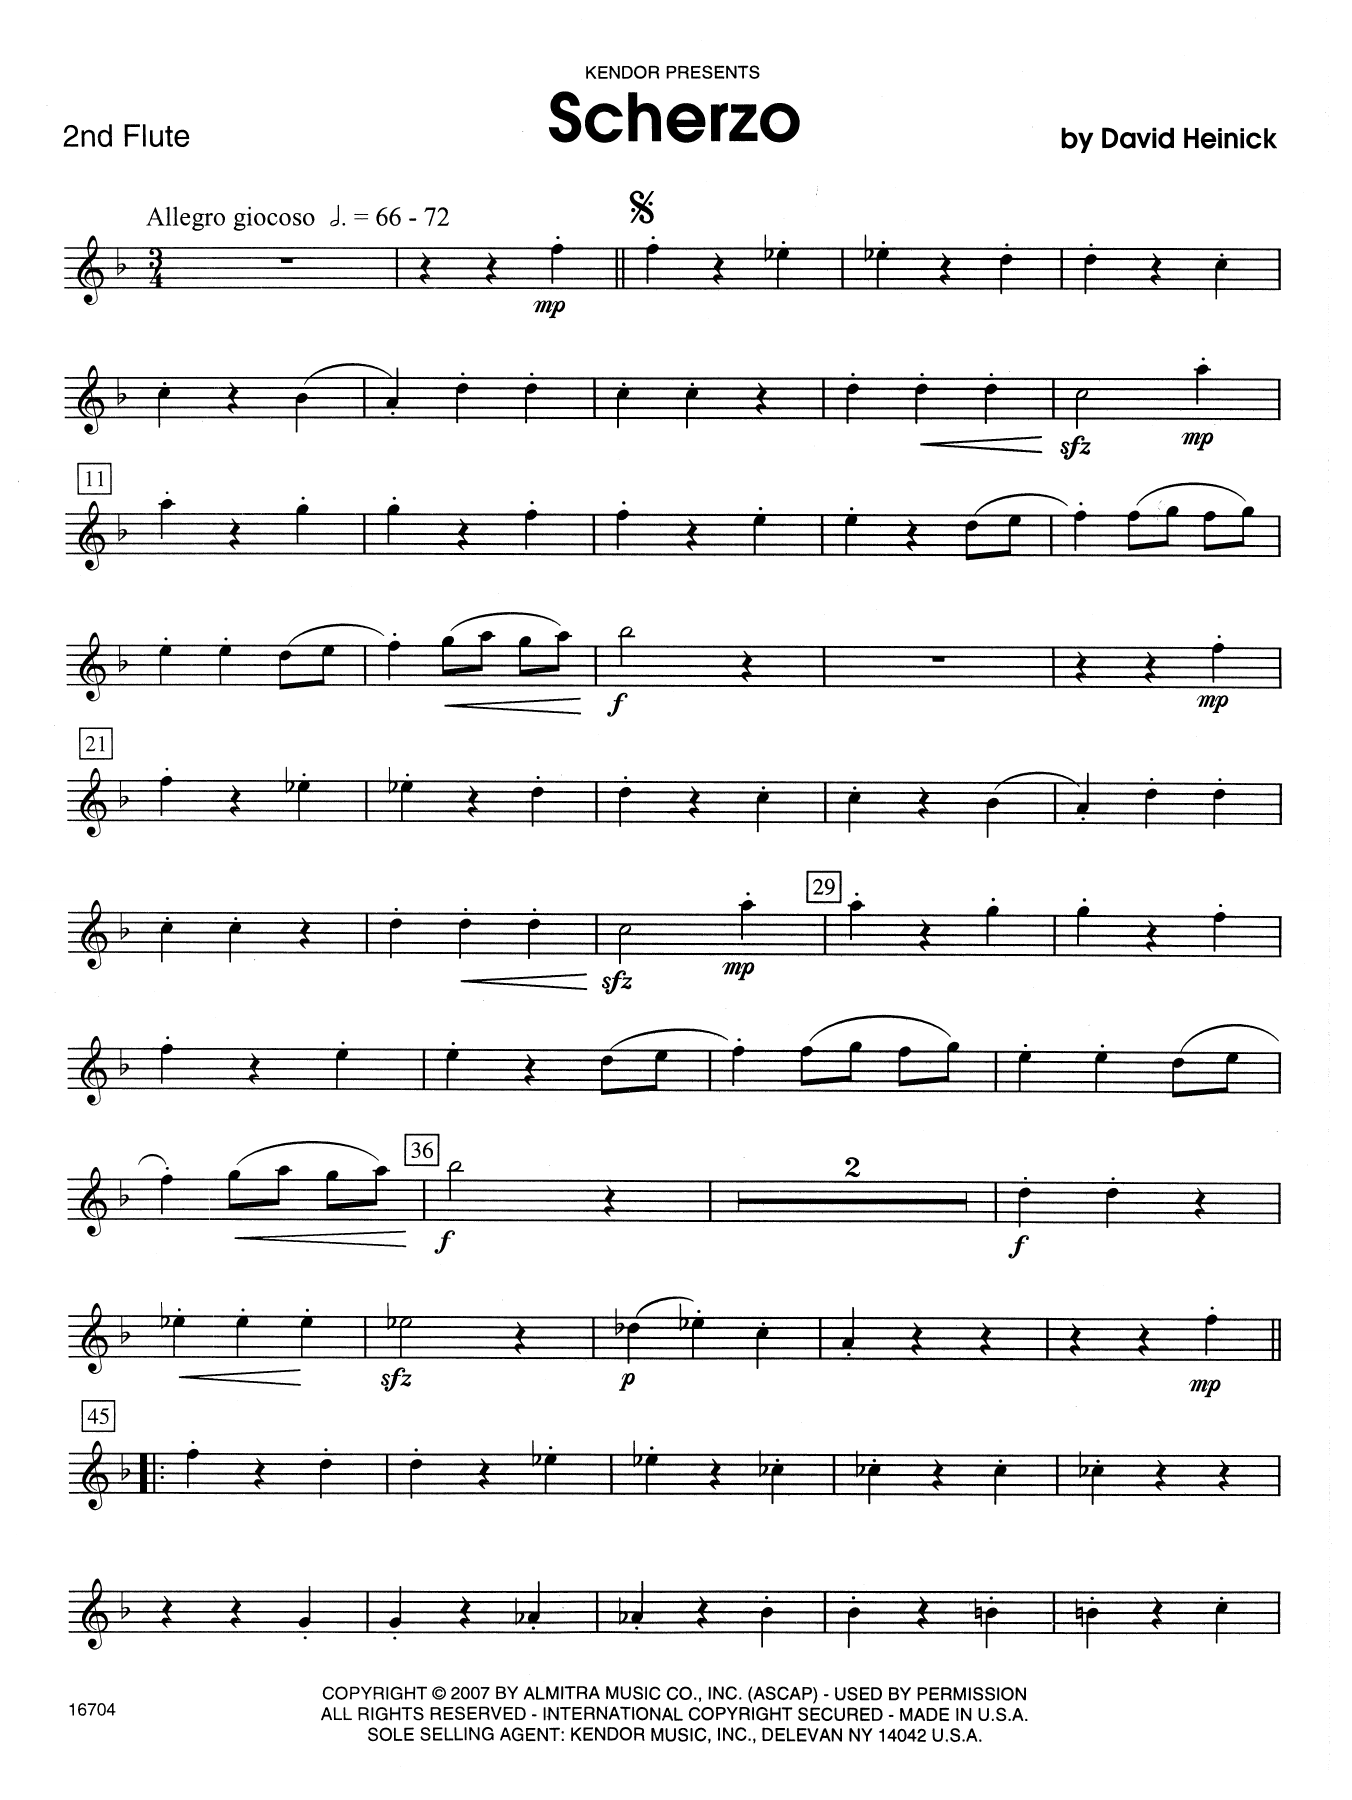 David Heinick Scherzo - 2nd Flute sheet music notes and chords. Download Printable PDF.